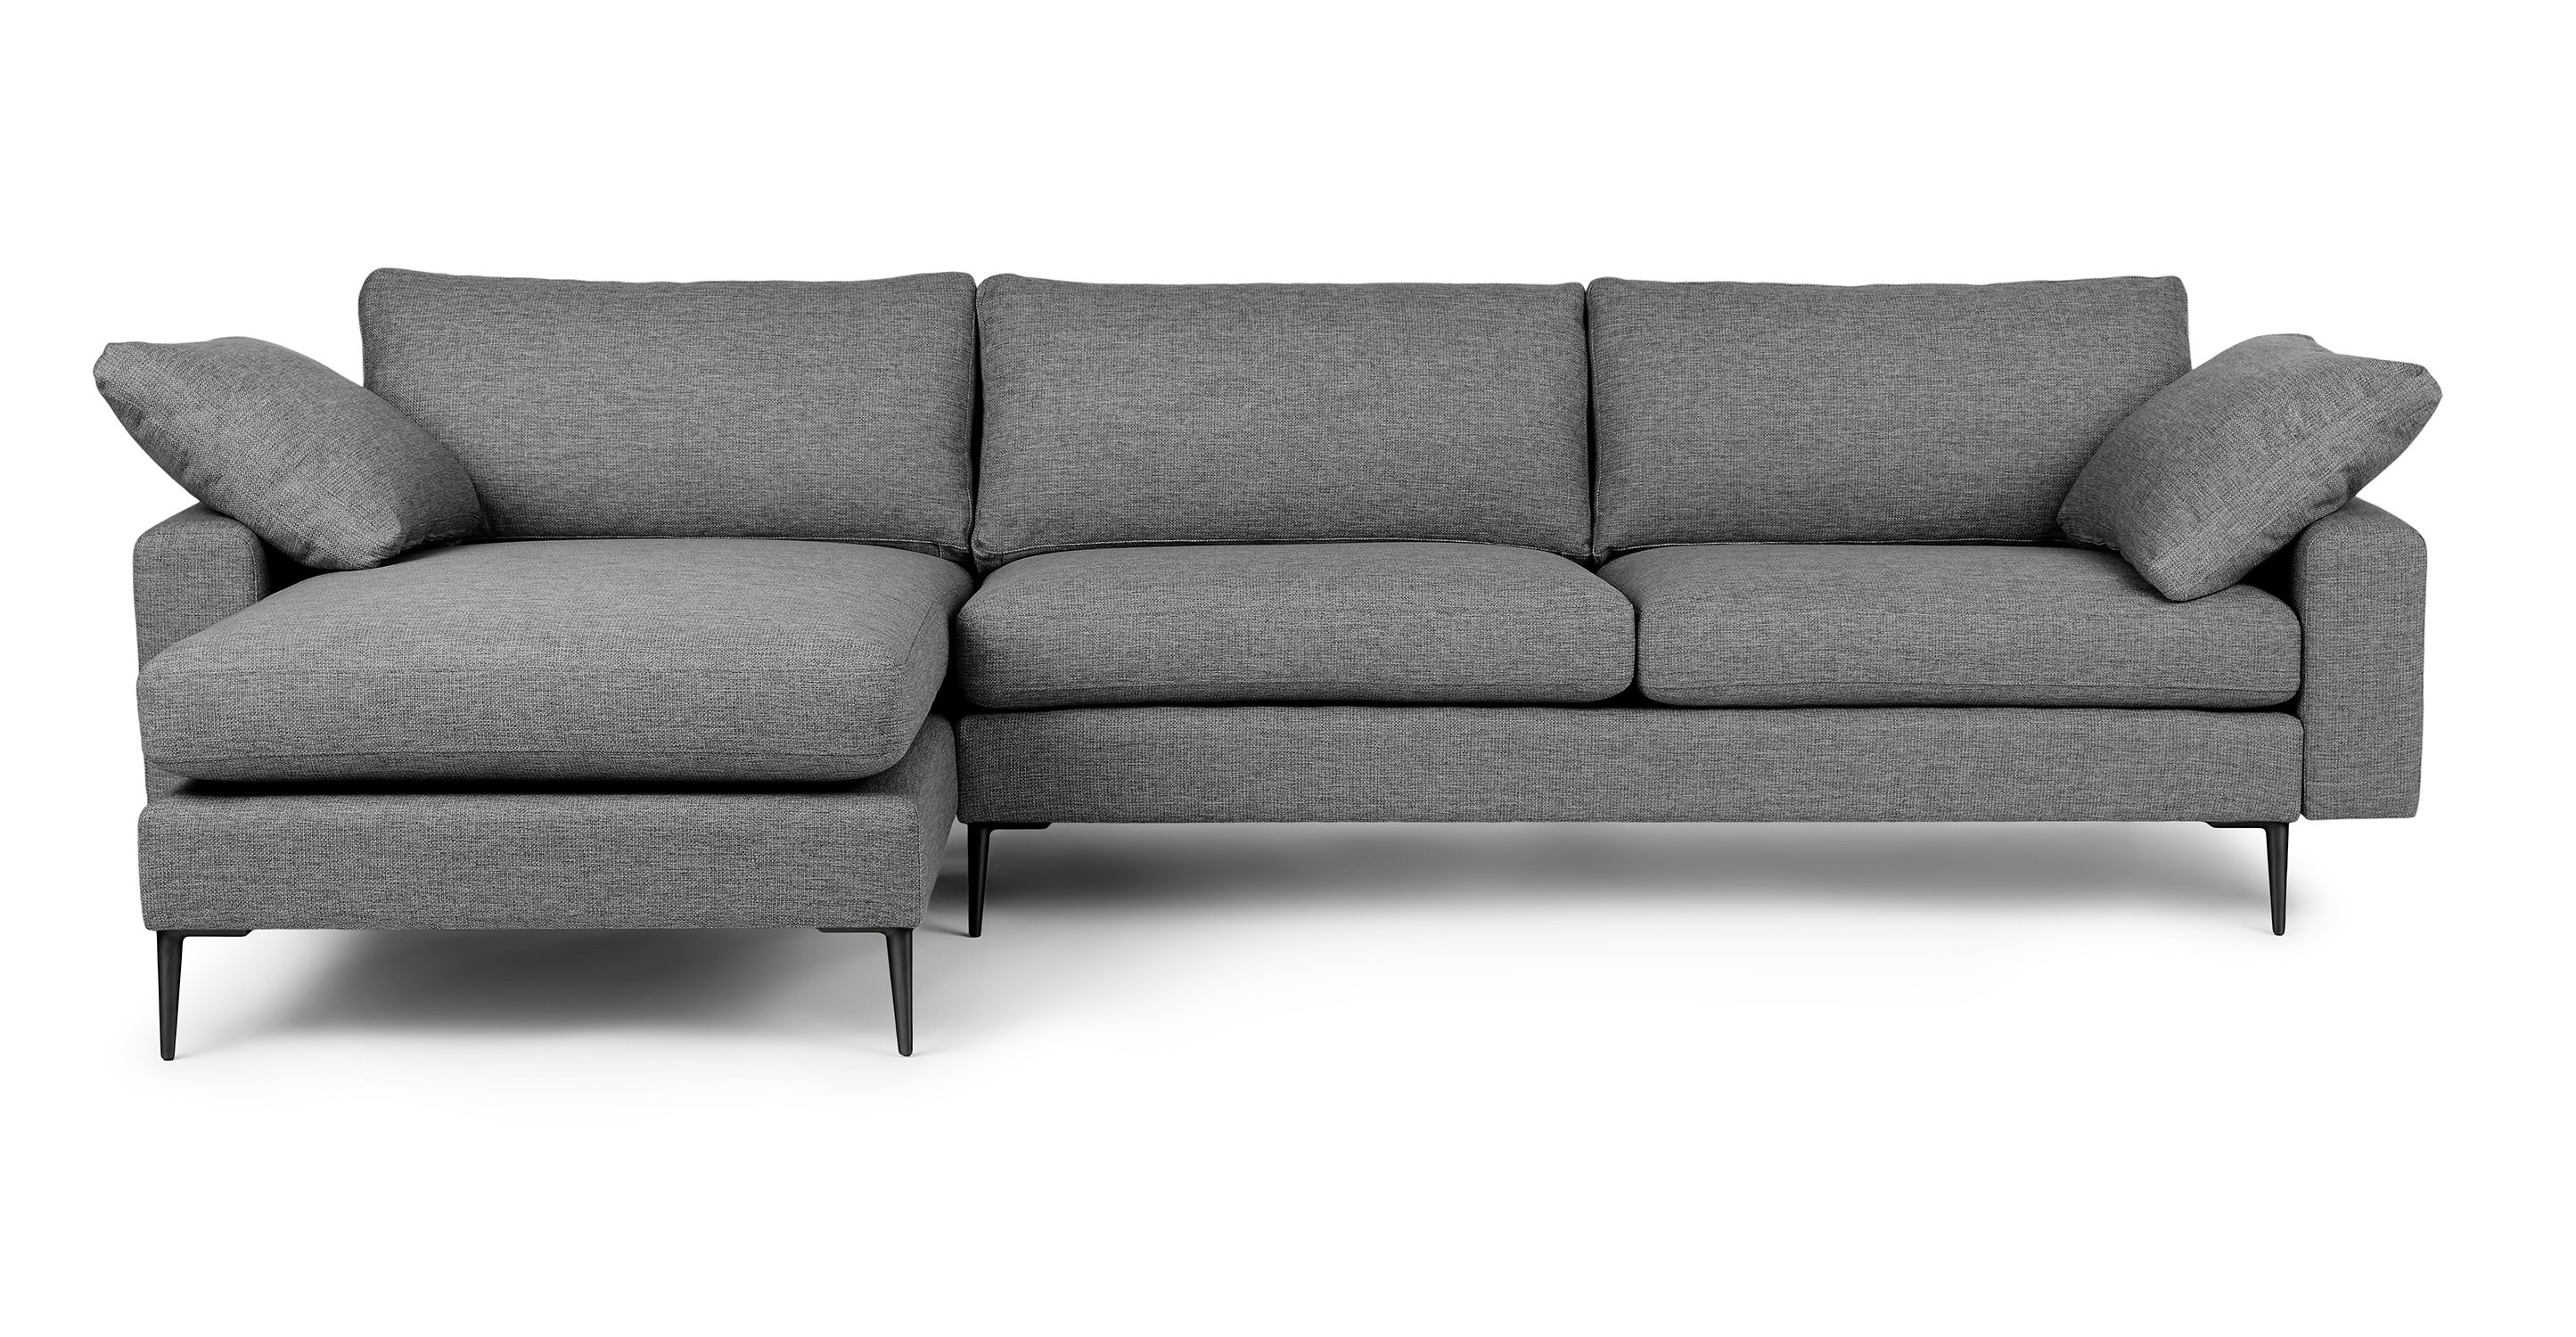 Gravel Gray Reversible Fabric Sectional | Nova | Article For Reversible Sectional Sofas (View 4 of 15)